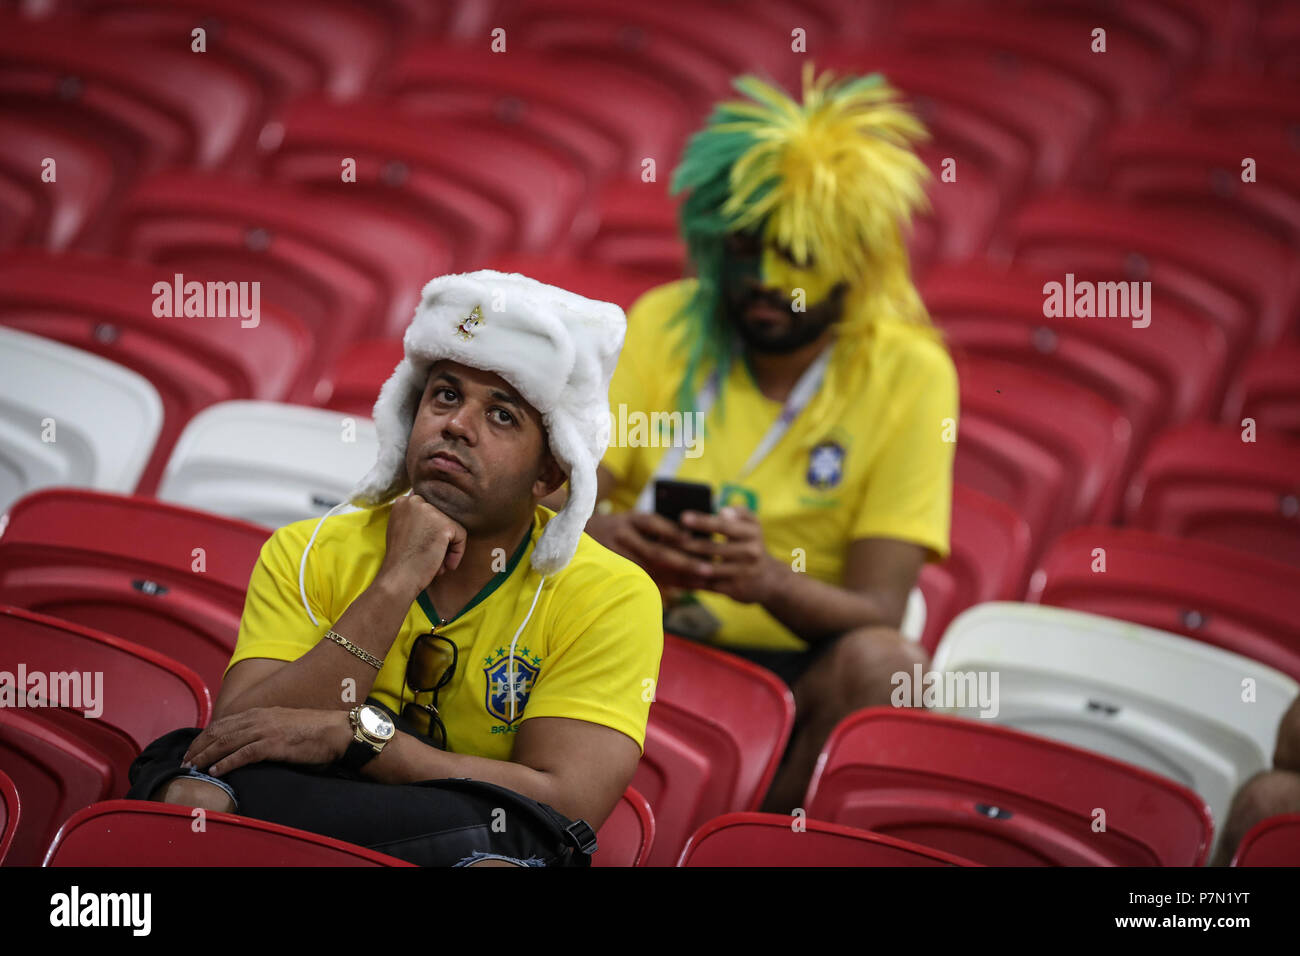 Kazan, Russia. 06th July, 2018. Fans after the match between Brazil and Belgium valid for the quarterfinals of the 2018 World Cup finals, held in Arena Kazan, Russia. Belgium wins 2-1. Credit: Thiago Bernardes/Pacific Press/Alamy Live News Stock Photo